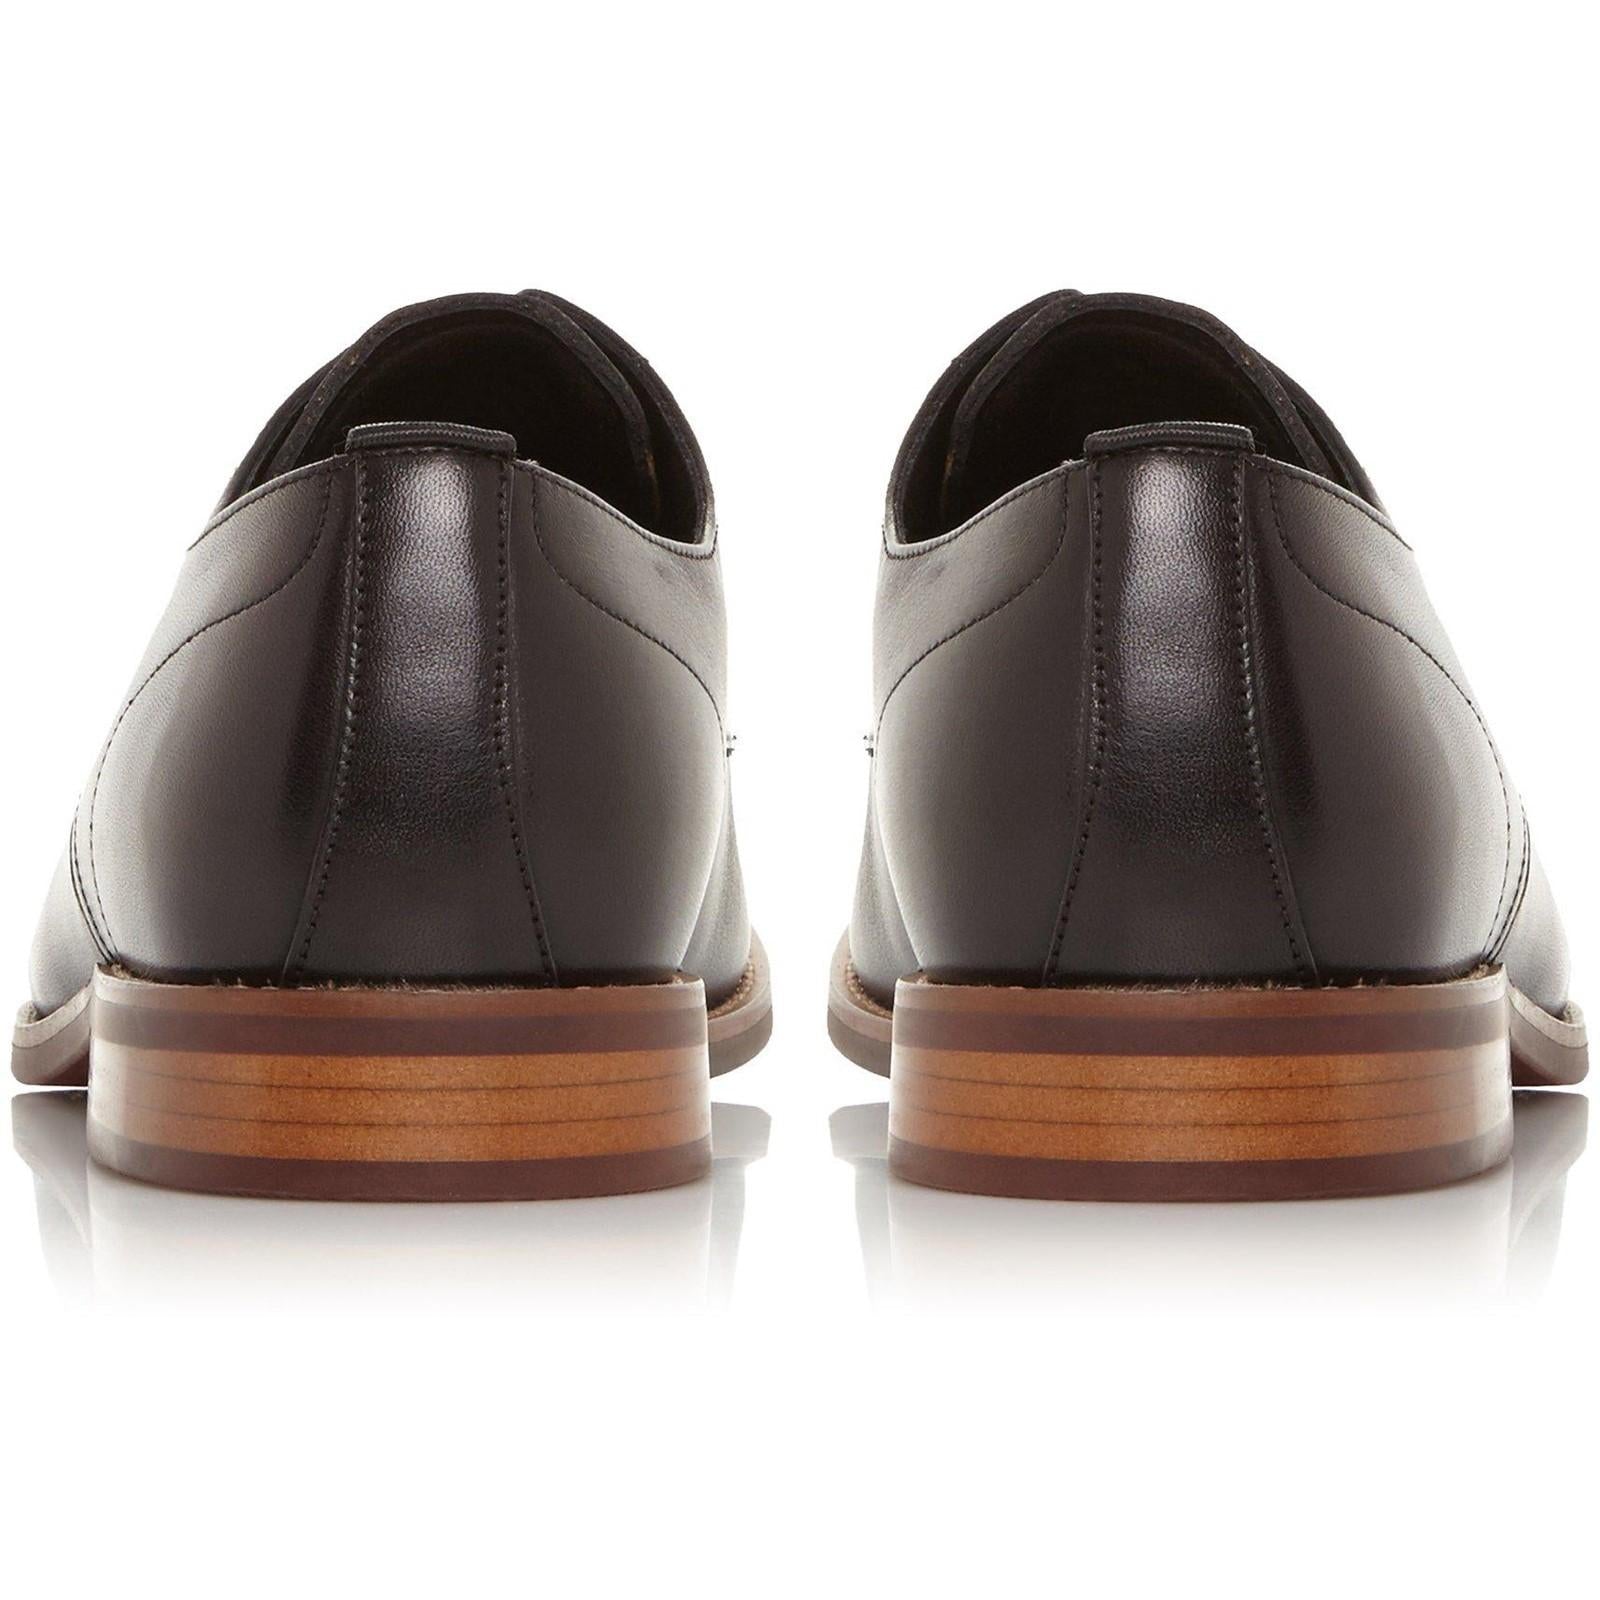 Dune London Suffolks Leather Smart Gibson Shoes